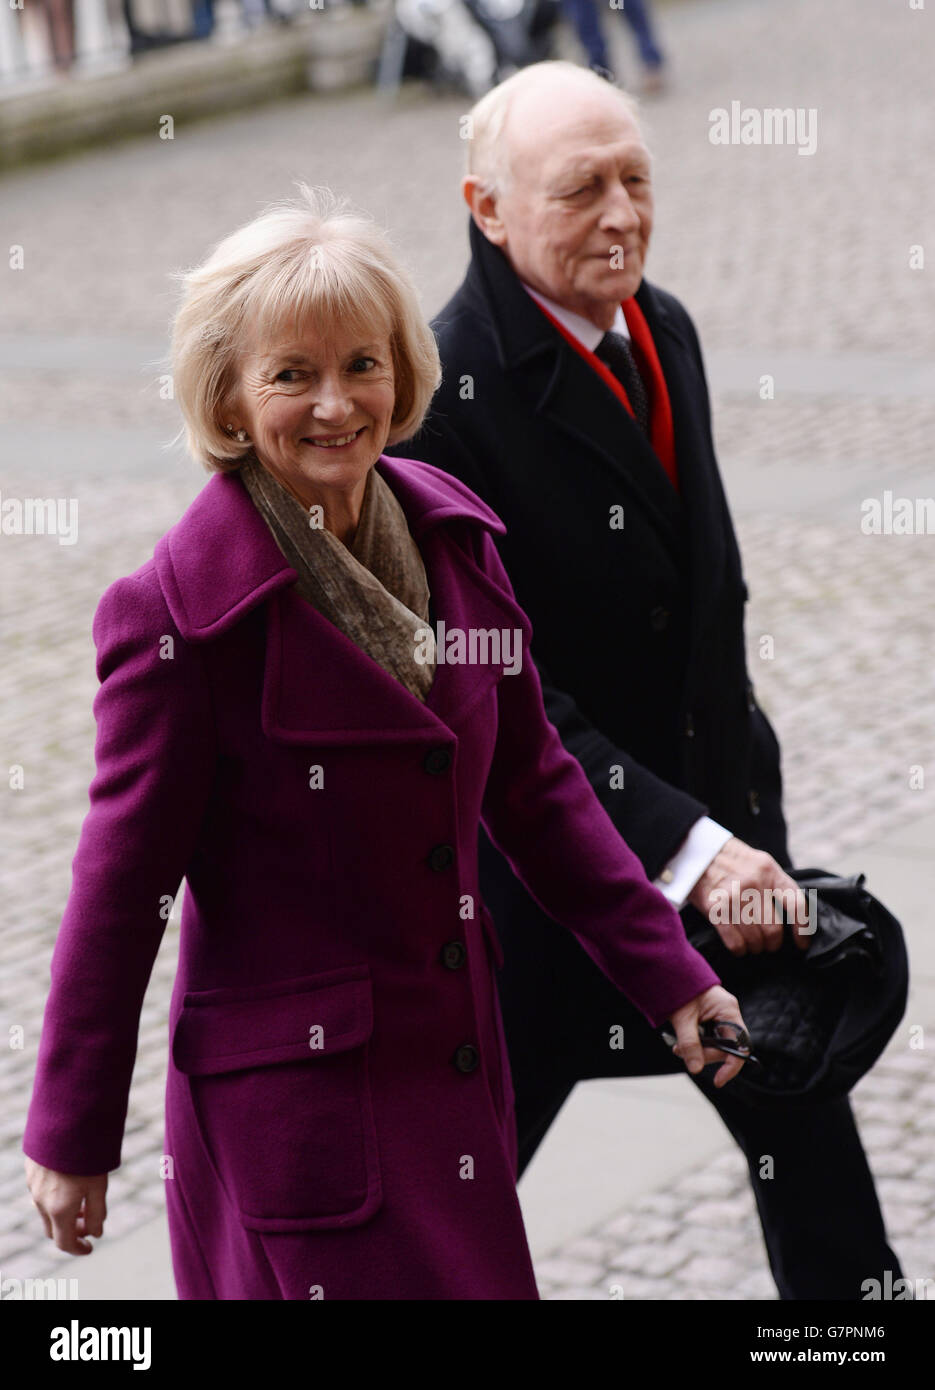 Lord Neil Kinnock and Baroness Glenys Kinnock arrive at Westminster Abbey in London for the memorial service of Lord Richard Attenborough, who died last year. Stock Photo